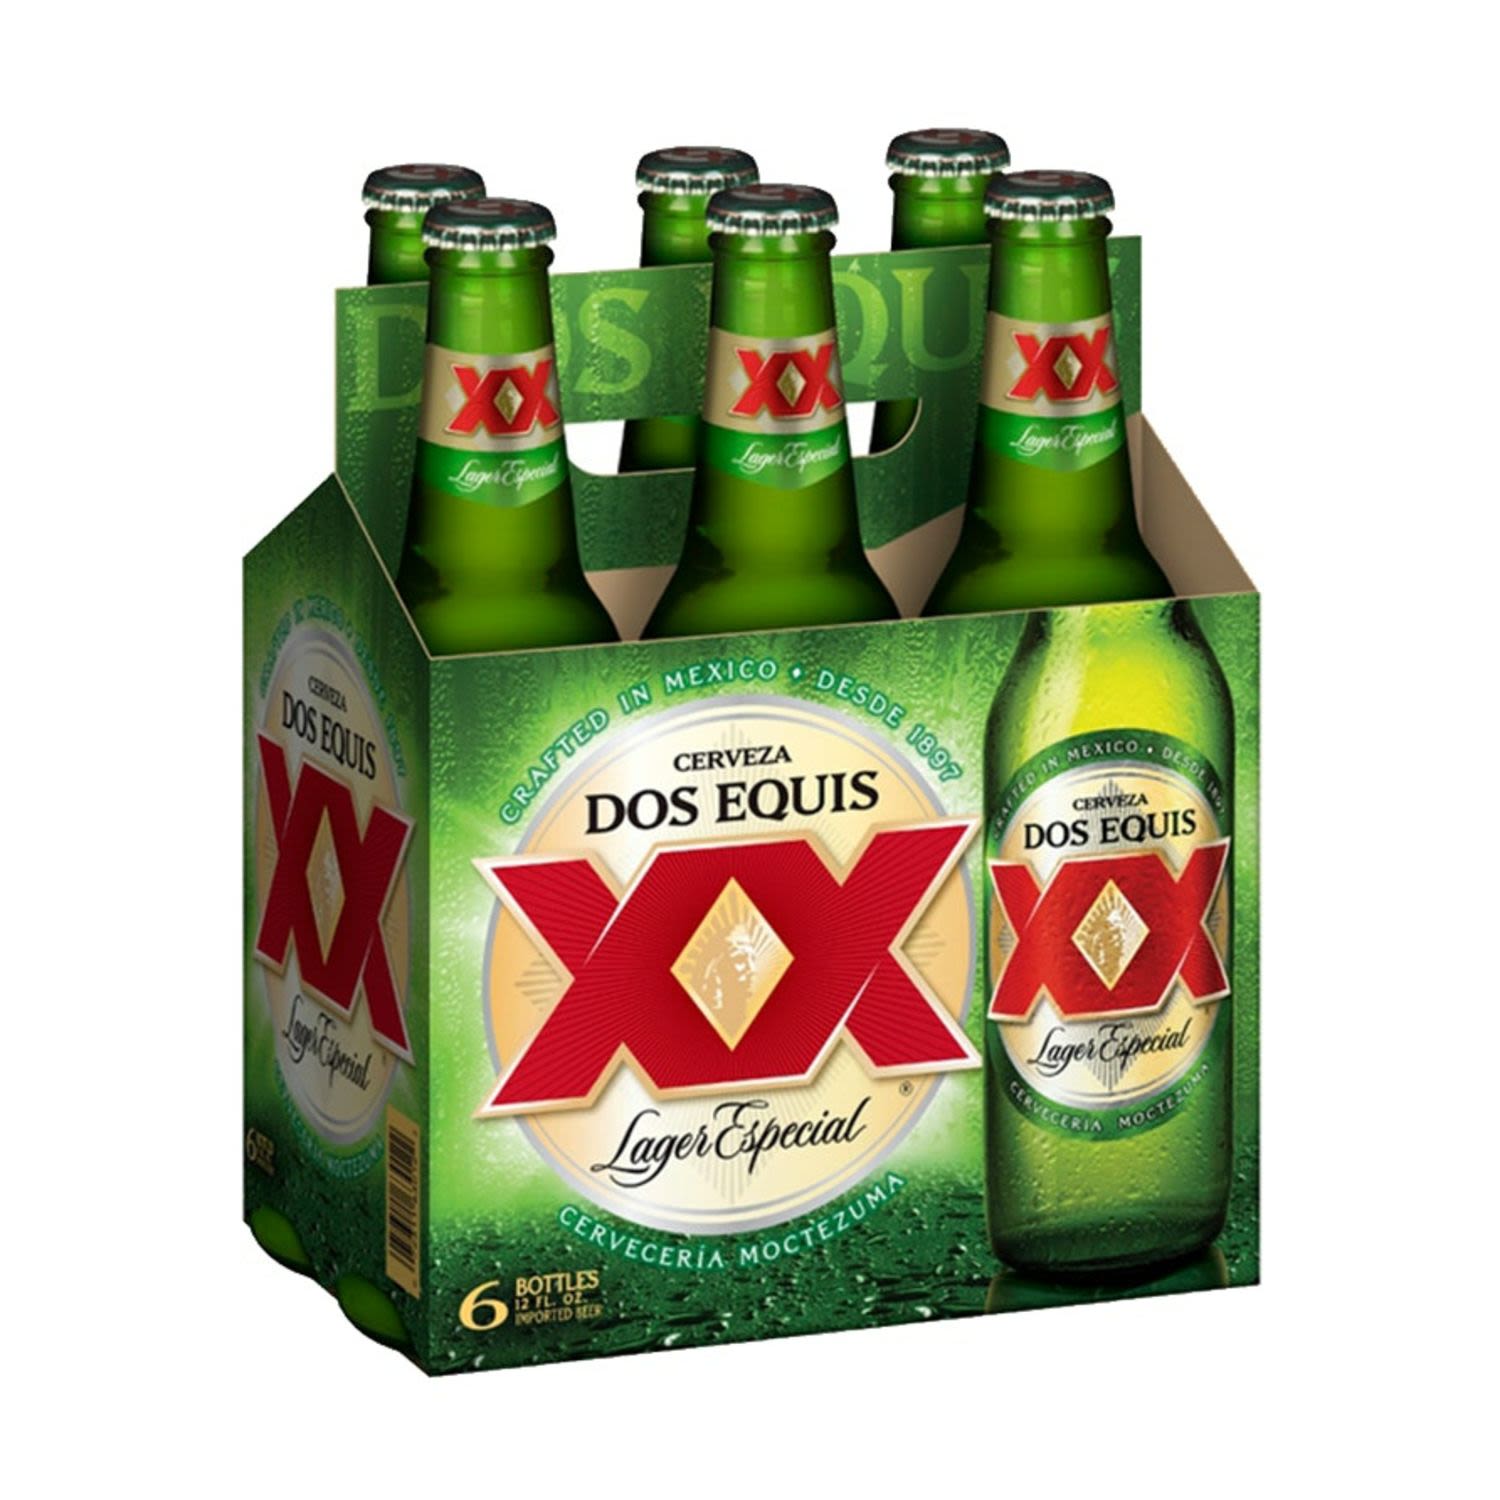 Dos Equis XX Lager Especial Bottle 355mL 6 Pack